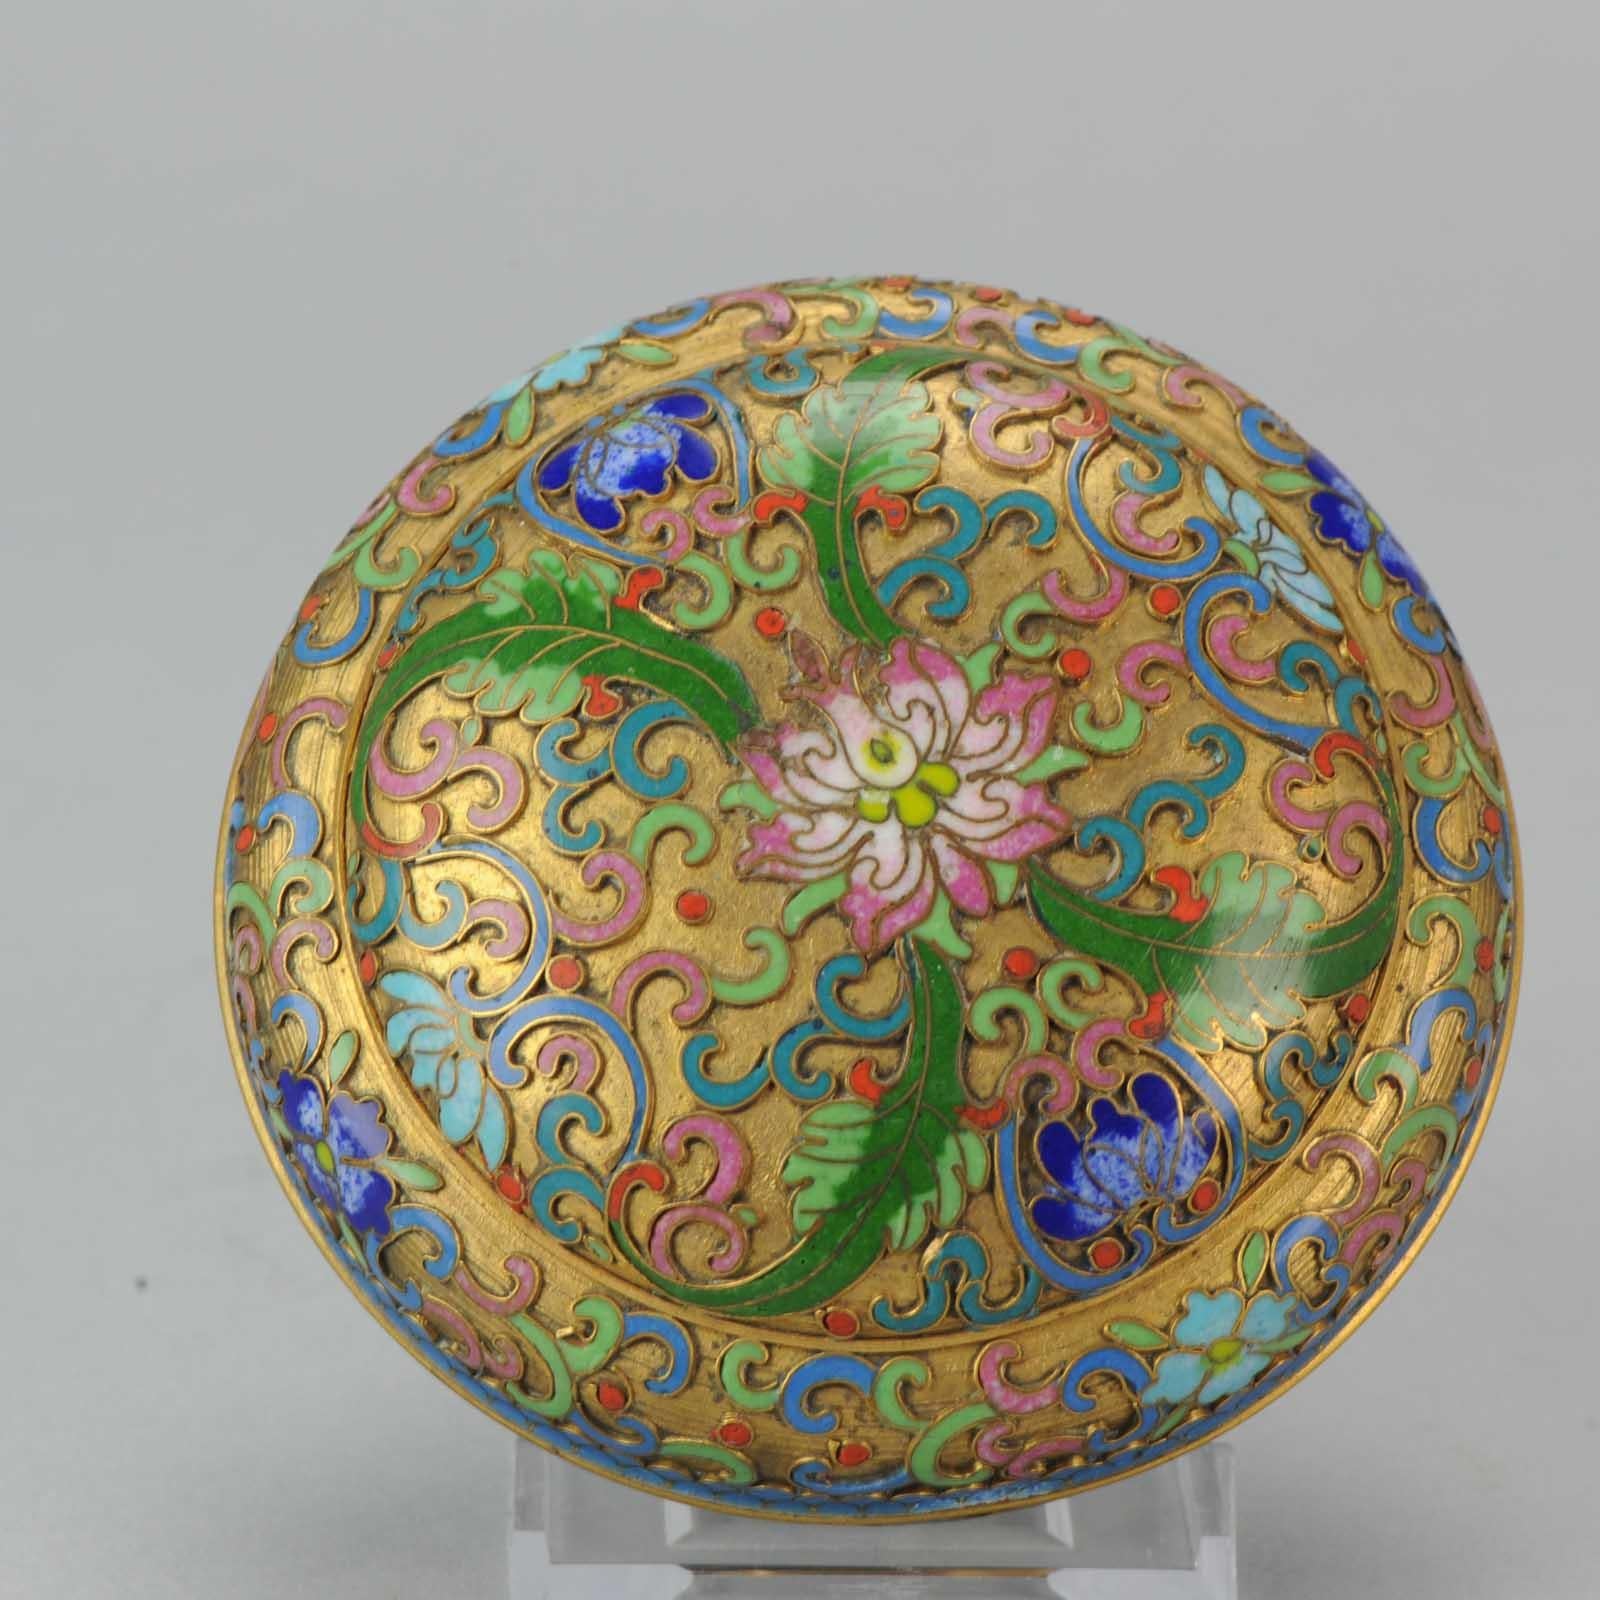 Perfect Antique Chinese Cloissone Box Qing Period Bronze, 19th/20th Century

Great piece of cloisonne.

Additional information:
Material: Porcelain & Pottery
Type: Boxes
Region of Origin: China
Period: Perfect
Age: Post-1940
Original/Reproduction: